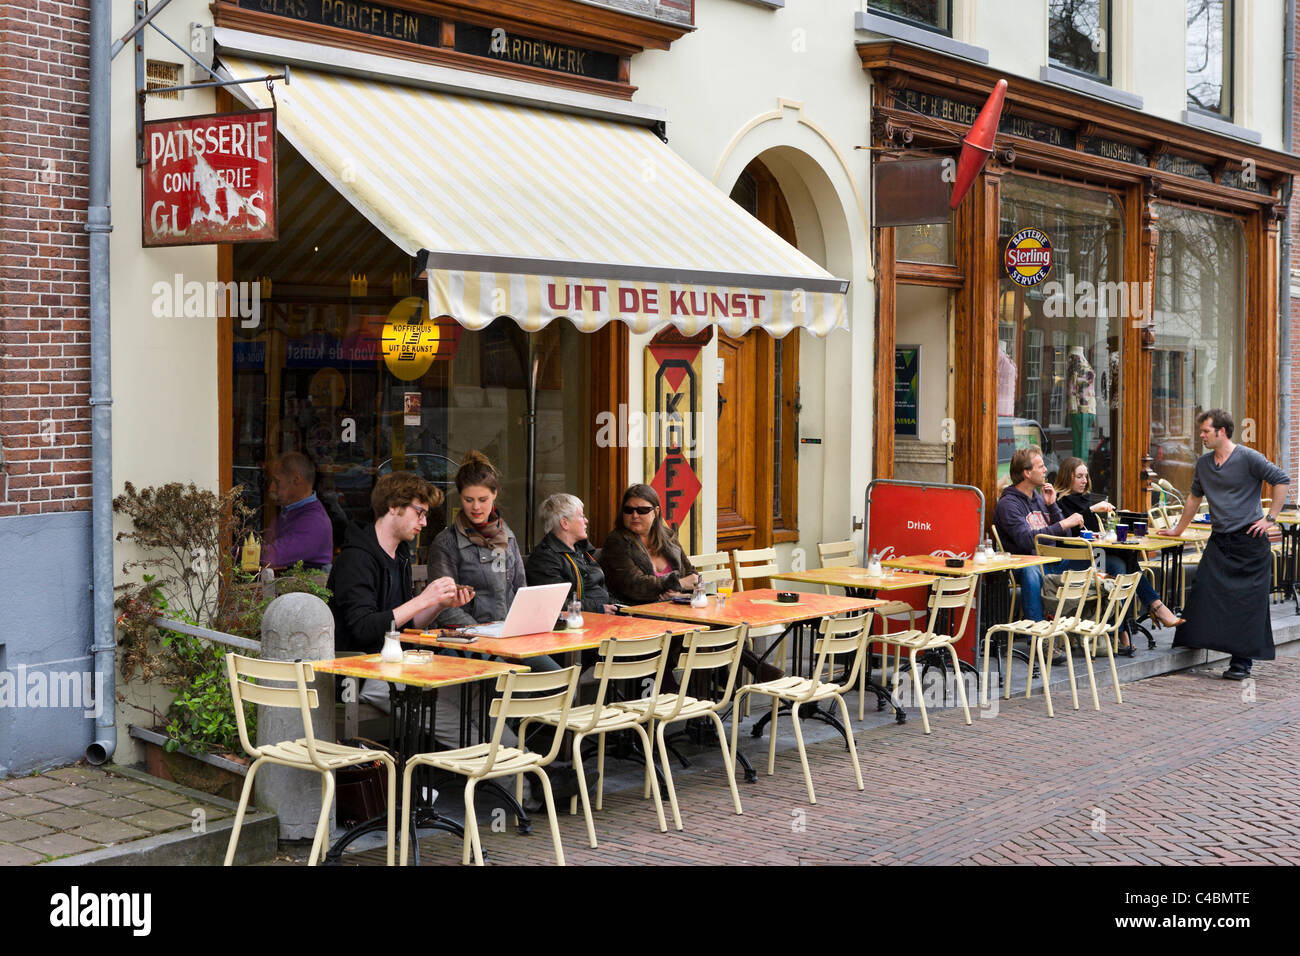 Sidewalk cafe in the in the old town centre, Delft, Netherlands Stock Photo